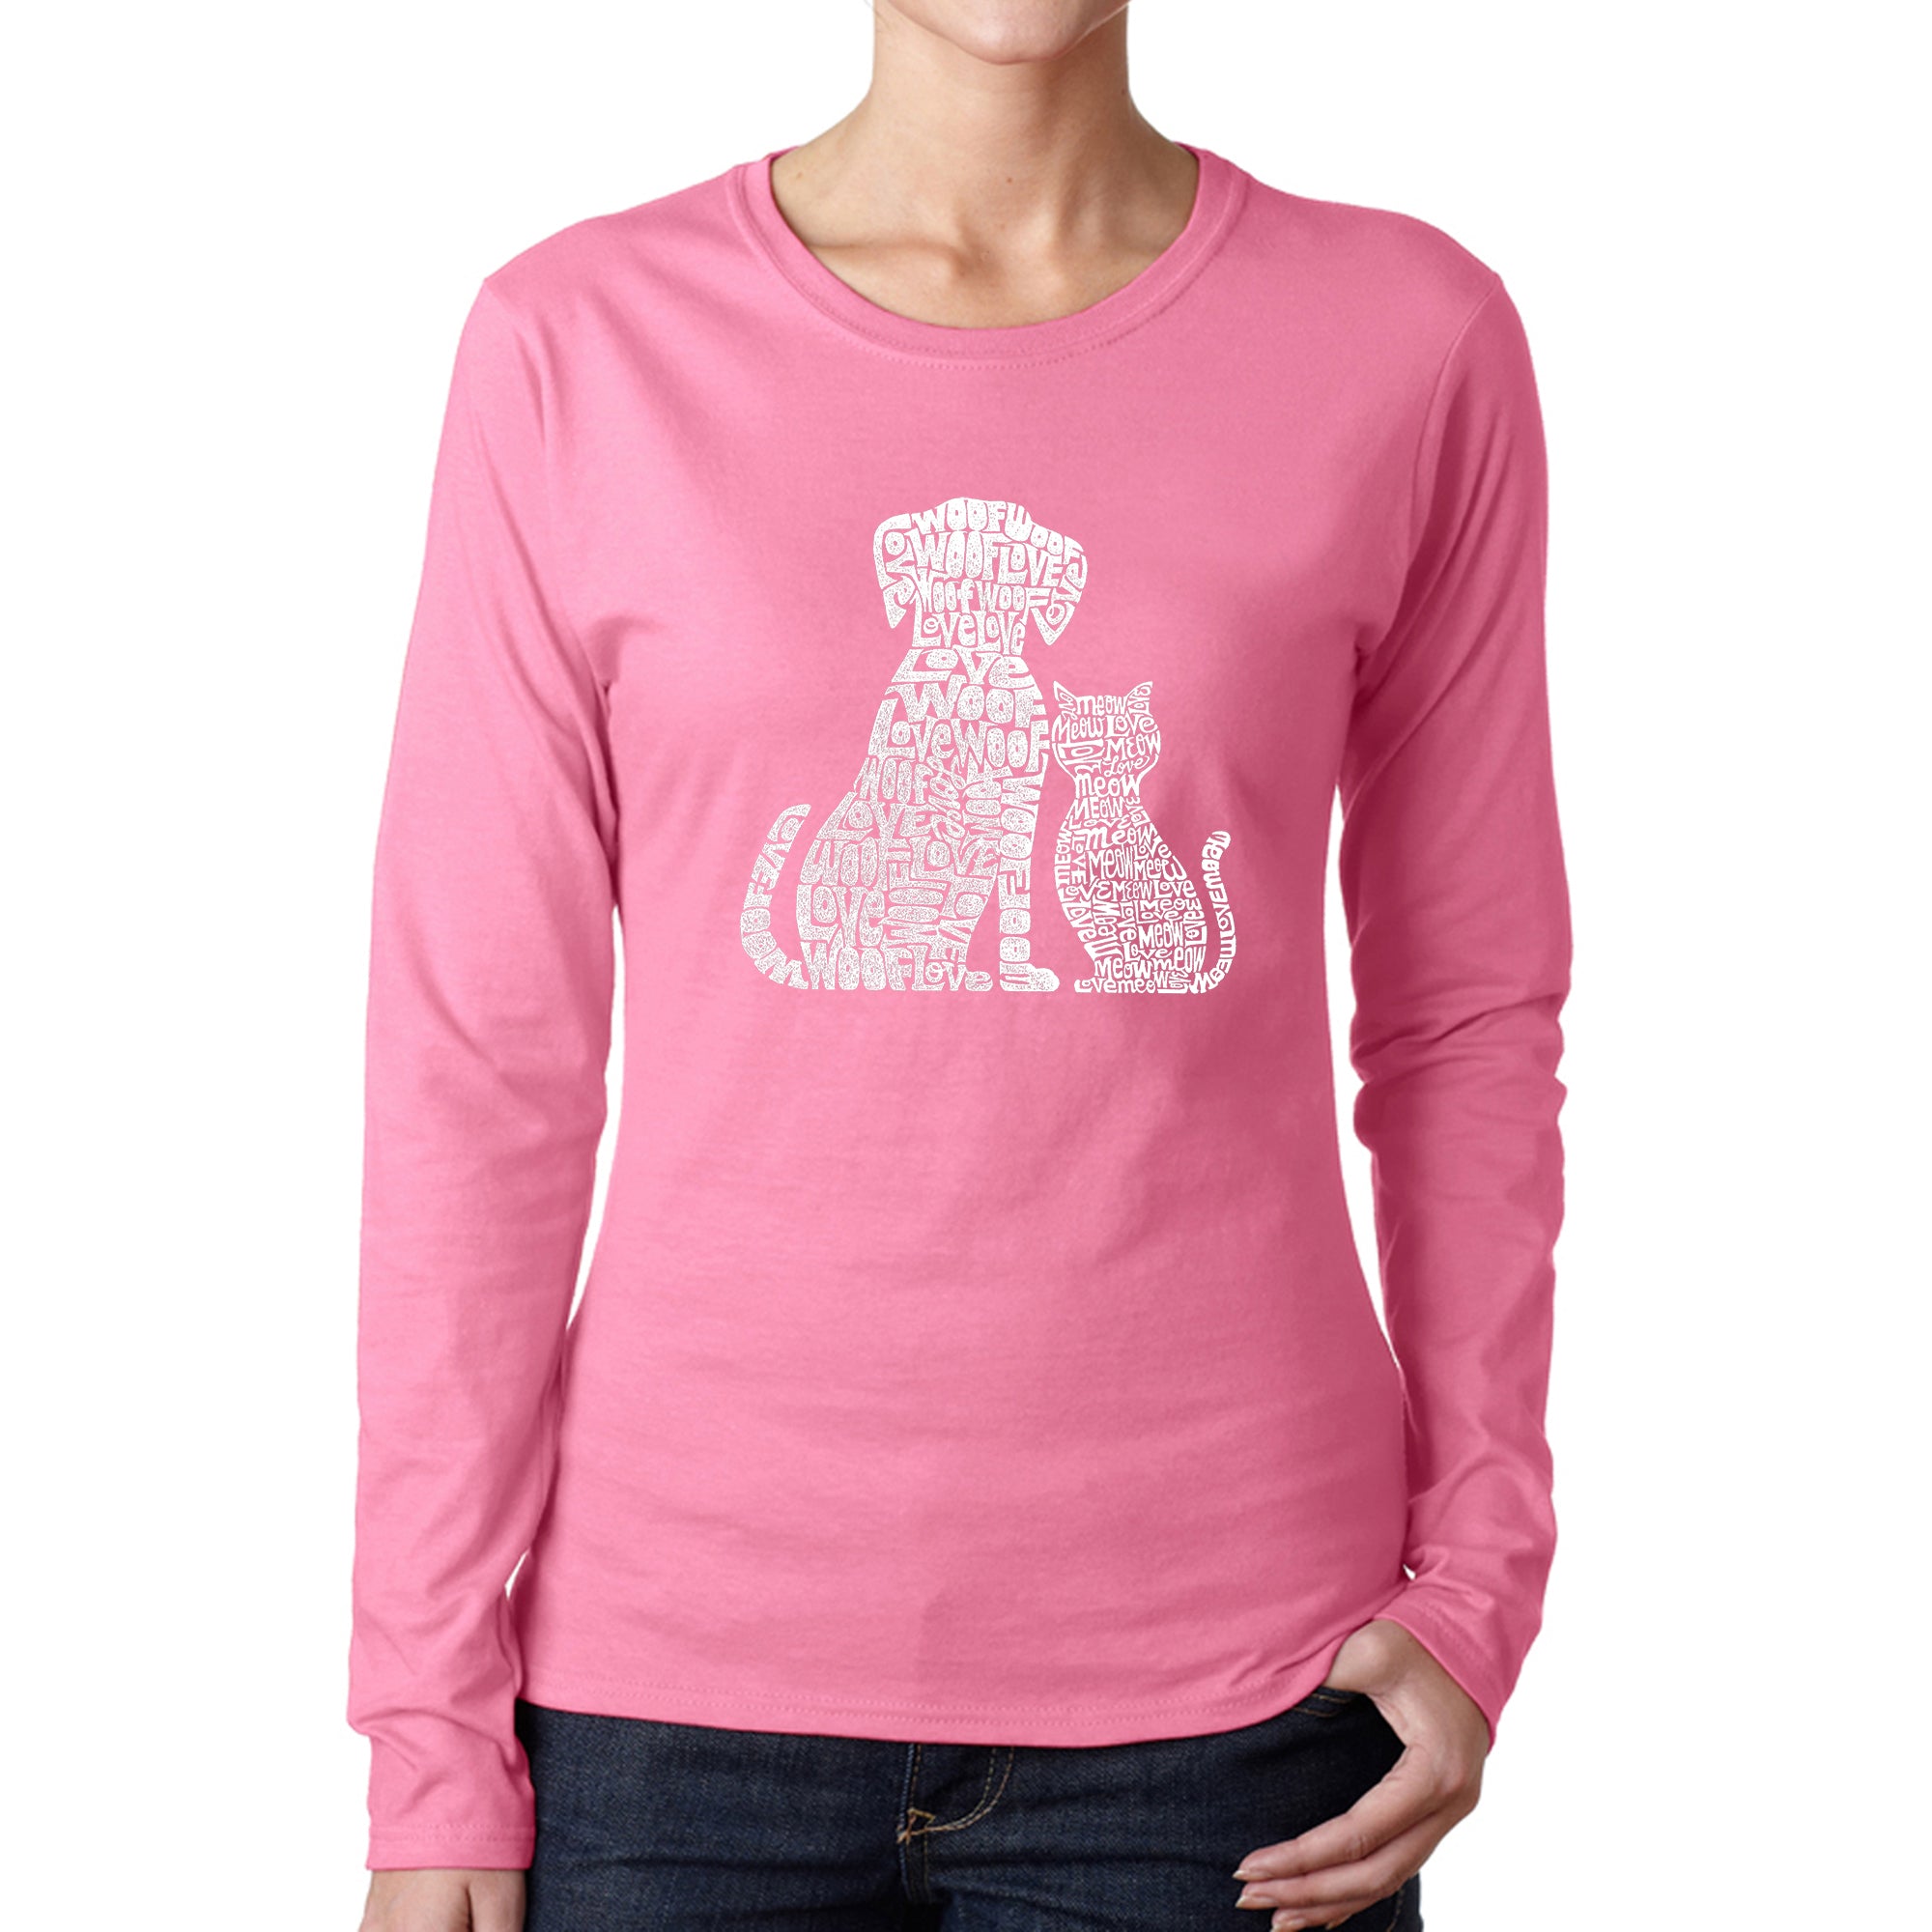 Dogs And Cats - Women's Word Art Long Sleeve T-Shirt - Pink - XX-Large